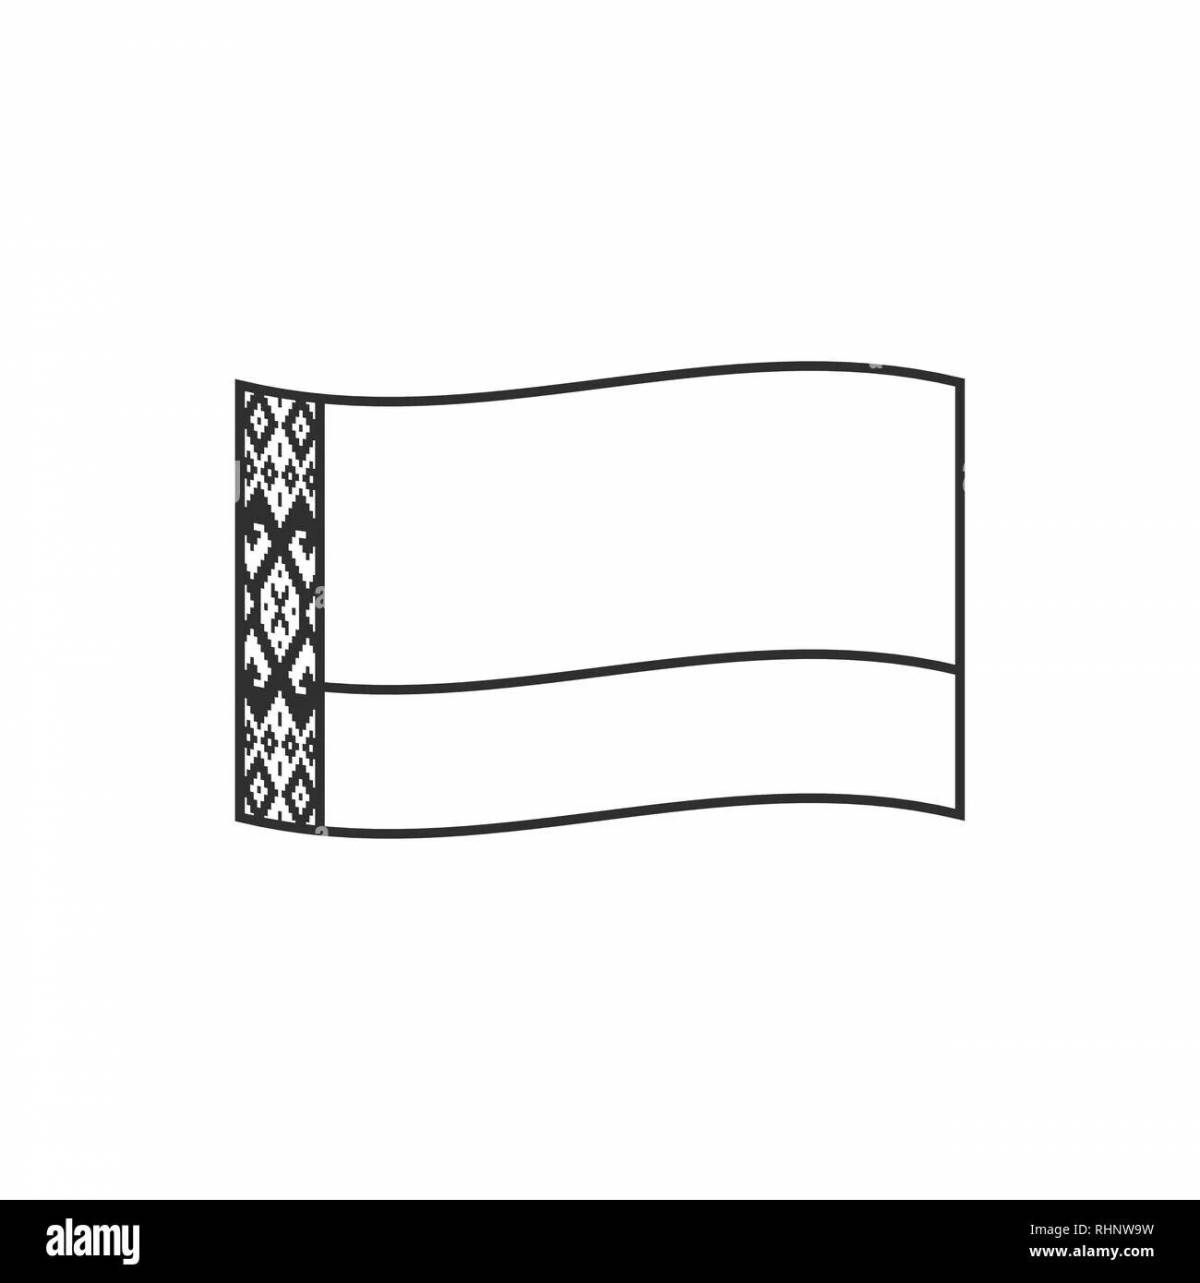 Relaxing belarusian flag coloring page for kids